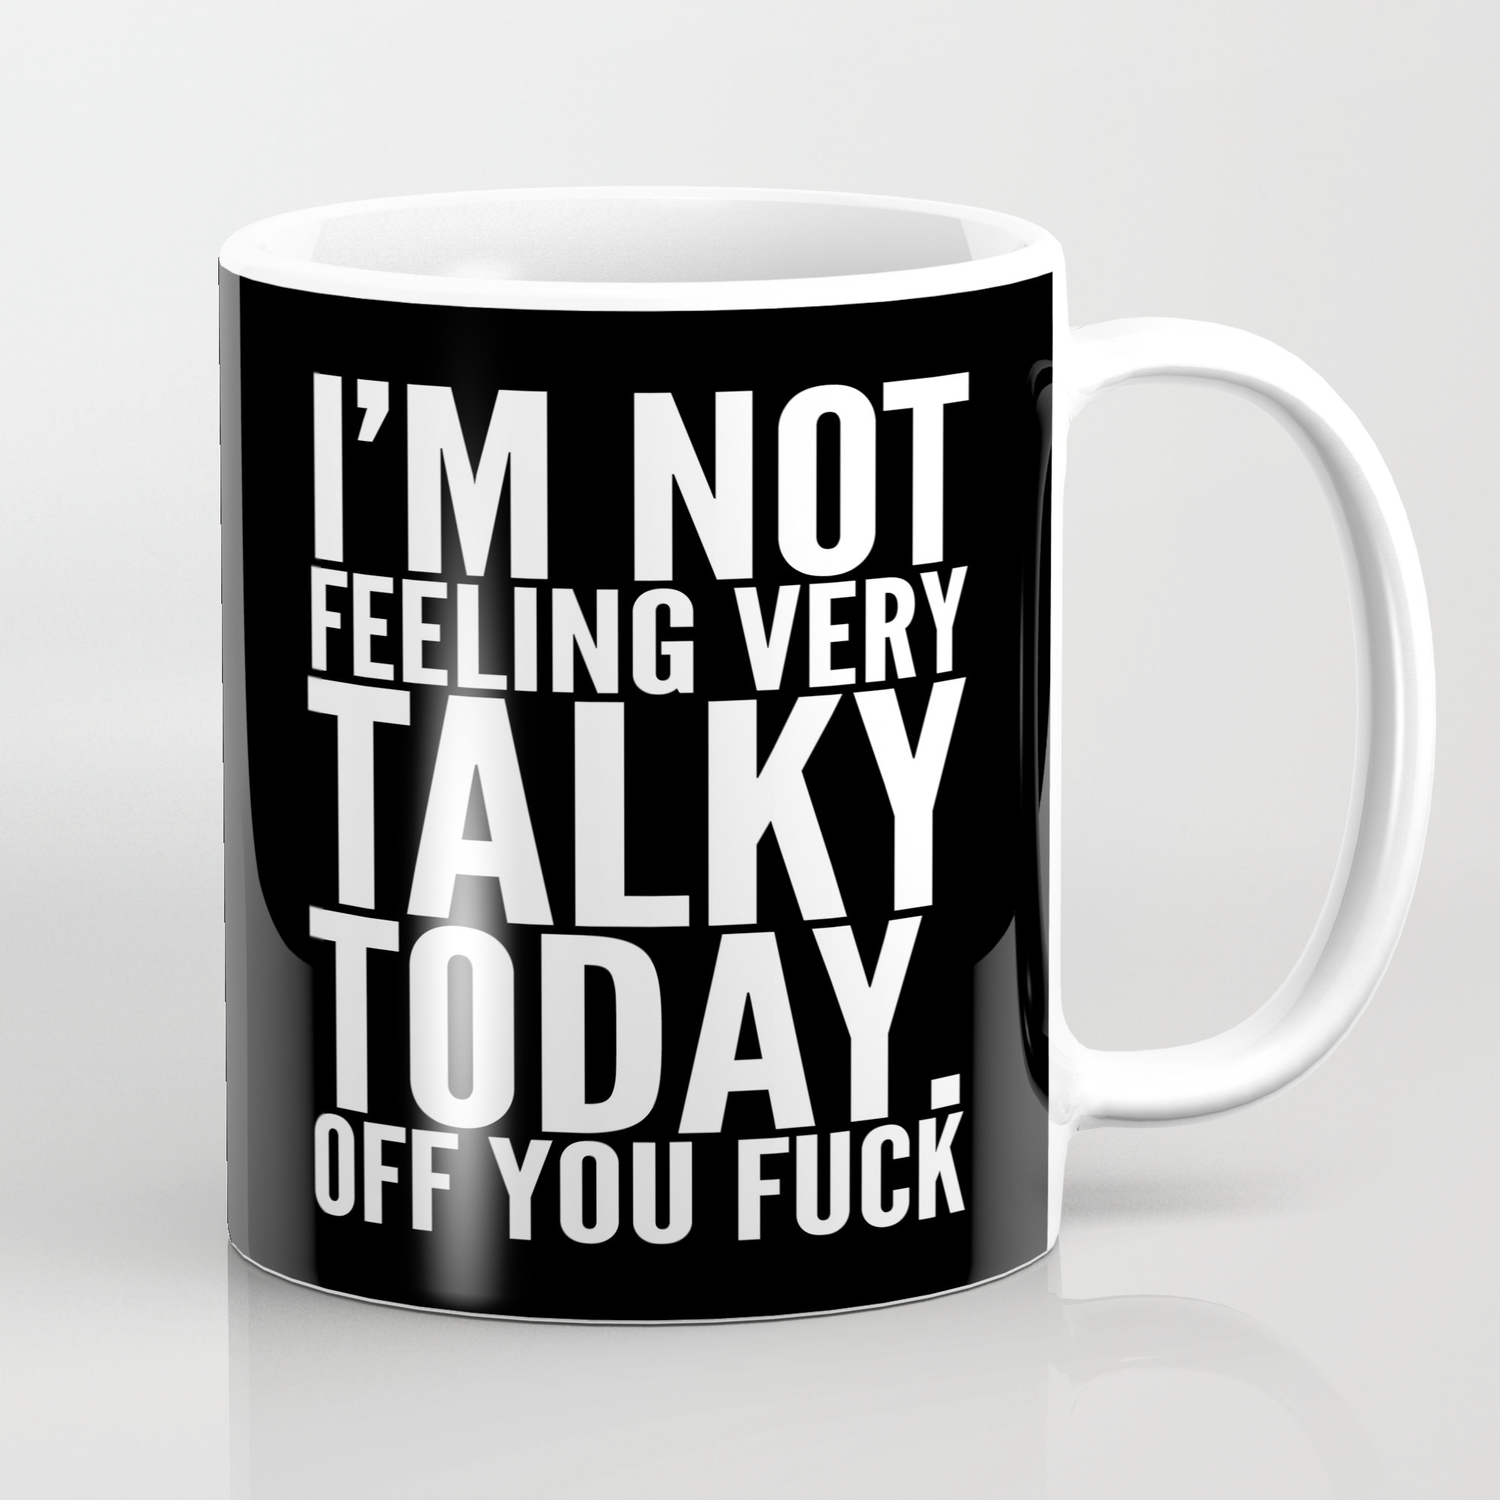 Personalised I'm Not feeling very talky today Name Gift Idea Off You F*CK Mug 